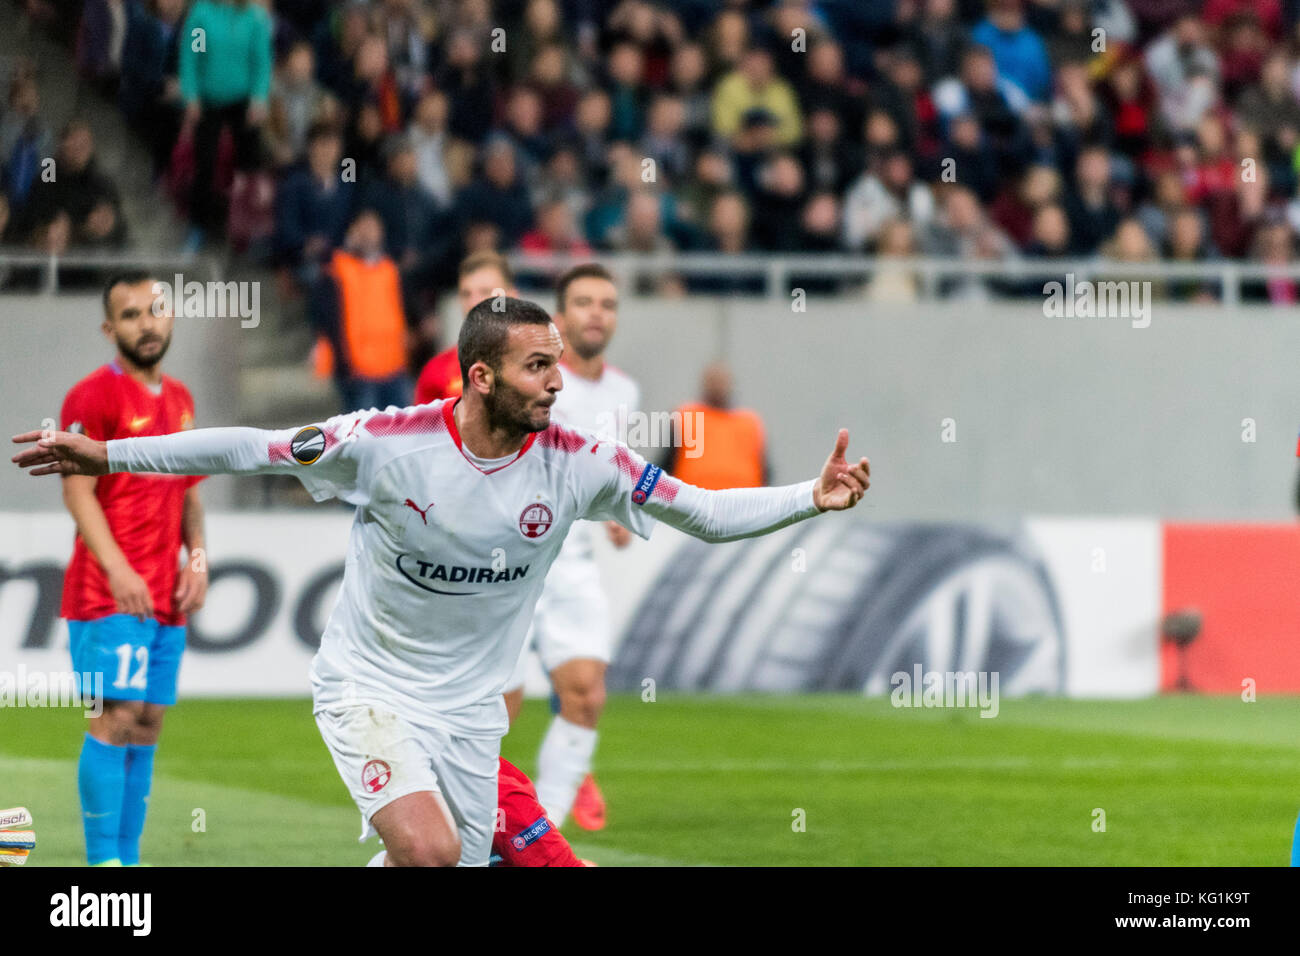 November 2, 2017: Ben Sahar #14 (Hapoel Beer-Sheva)   during the UEFA Europa League 2017-2018, Group Stage, Groupe G game between FCSB Bucharest (ROU) and Hapoel Beer-Sheva FC (ISR) at National Arena Stadium, Bucharest,  Romania ROU. Foto: Cronos/Catalin Soare Stock Photo